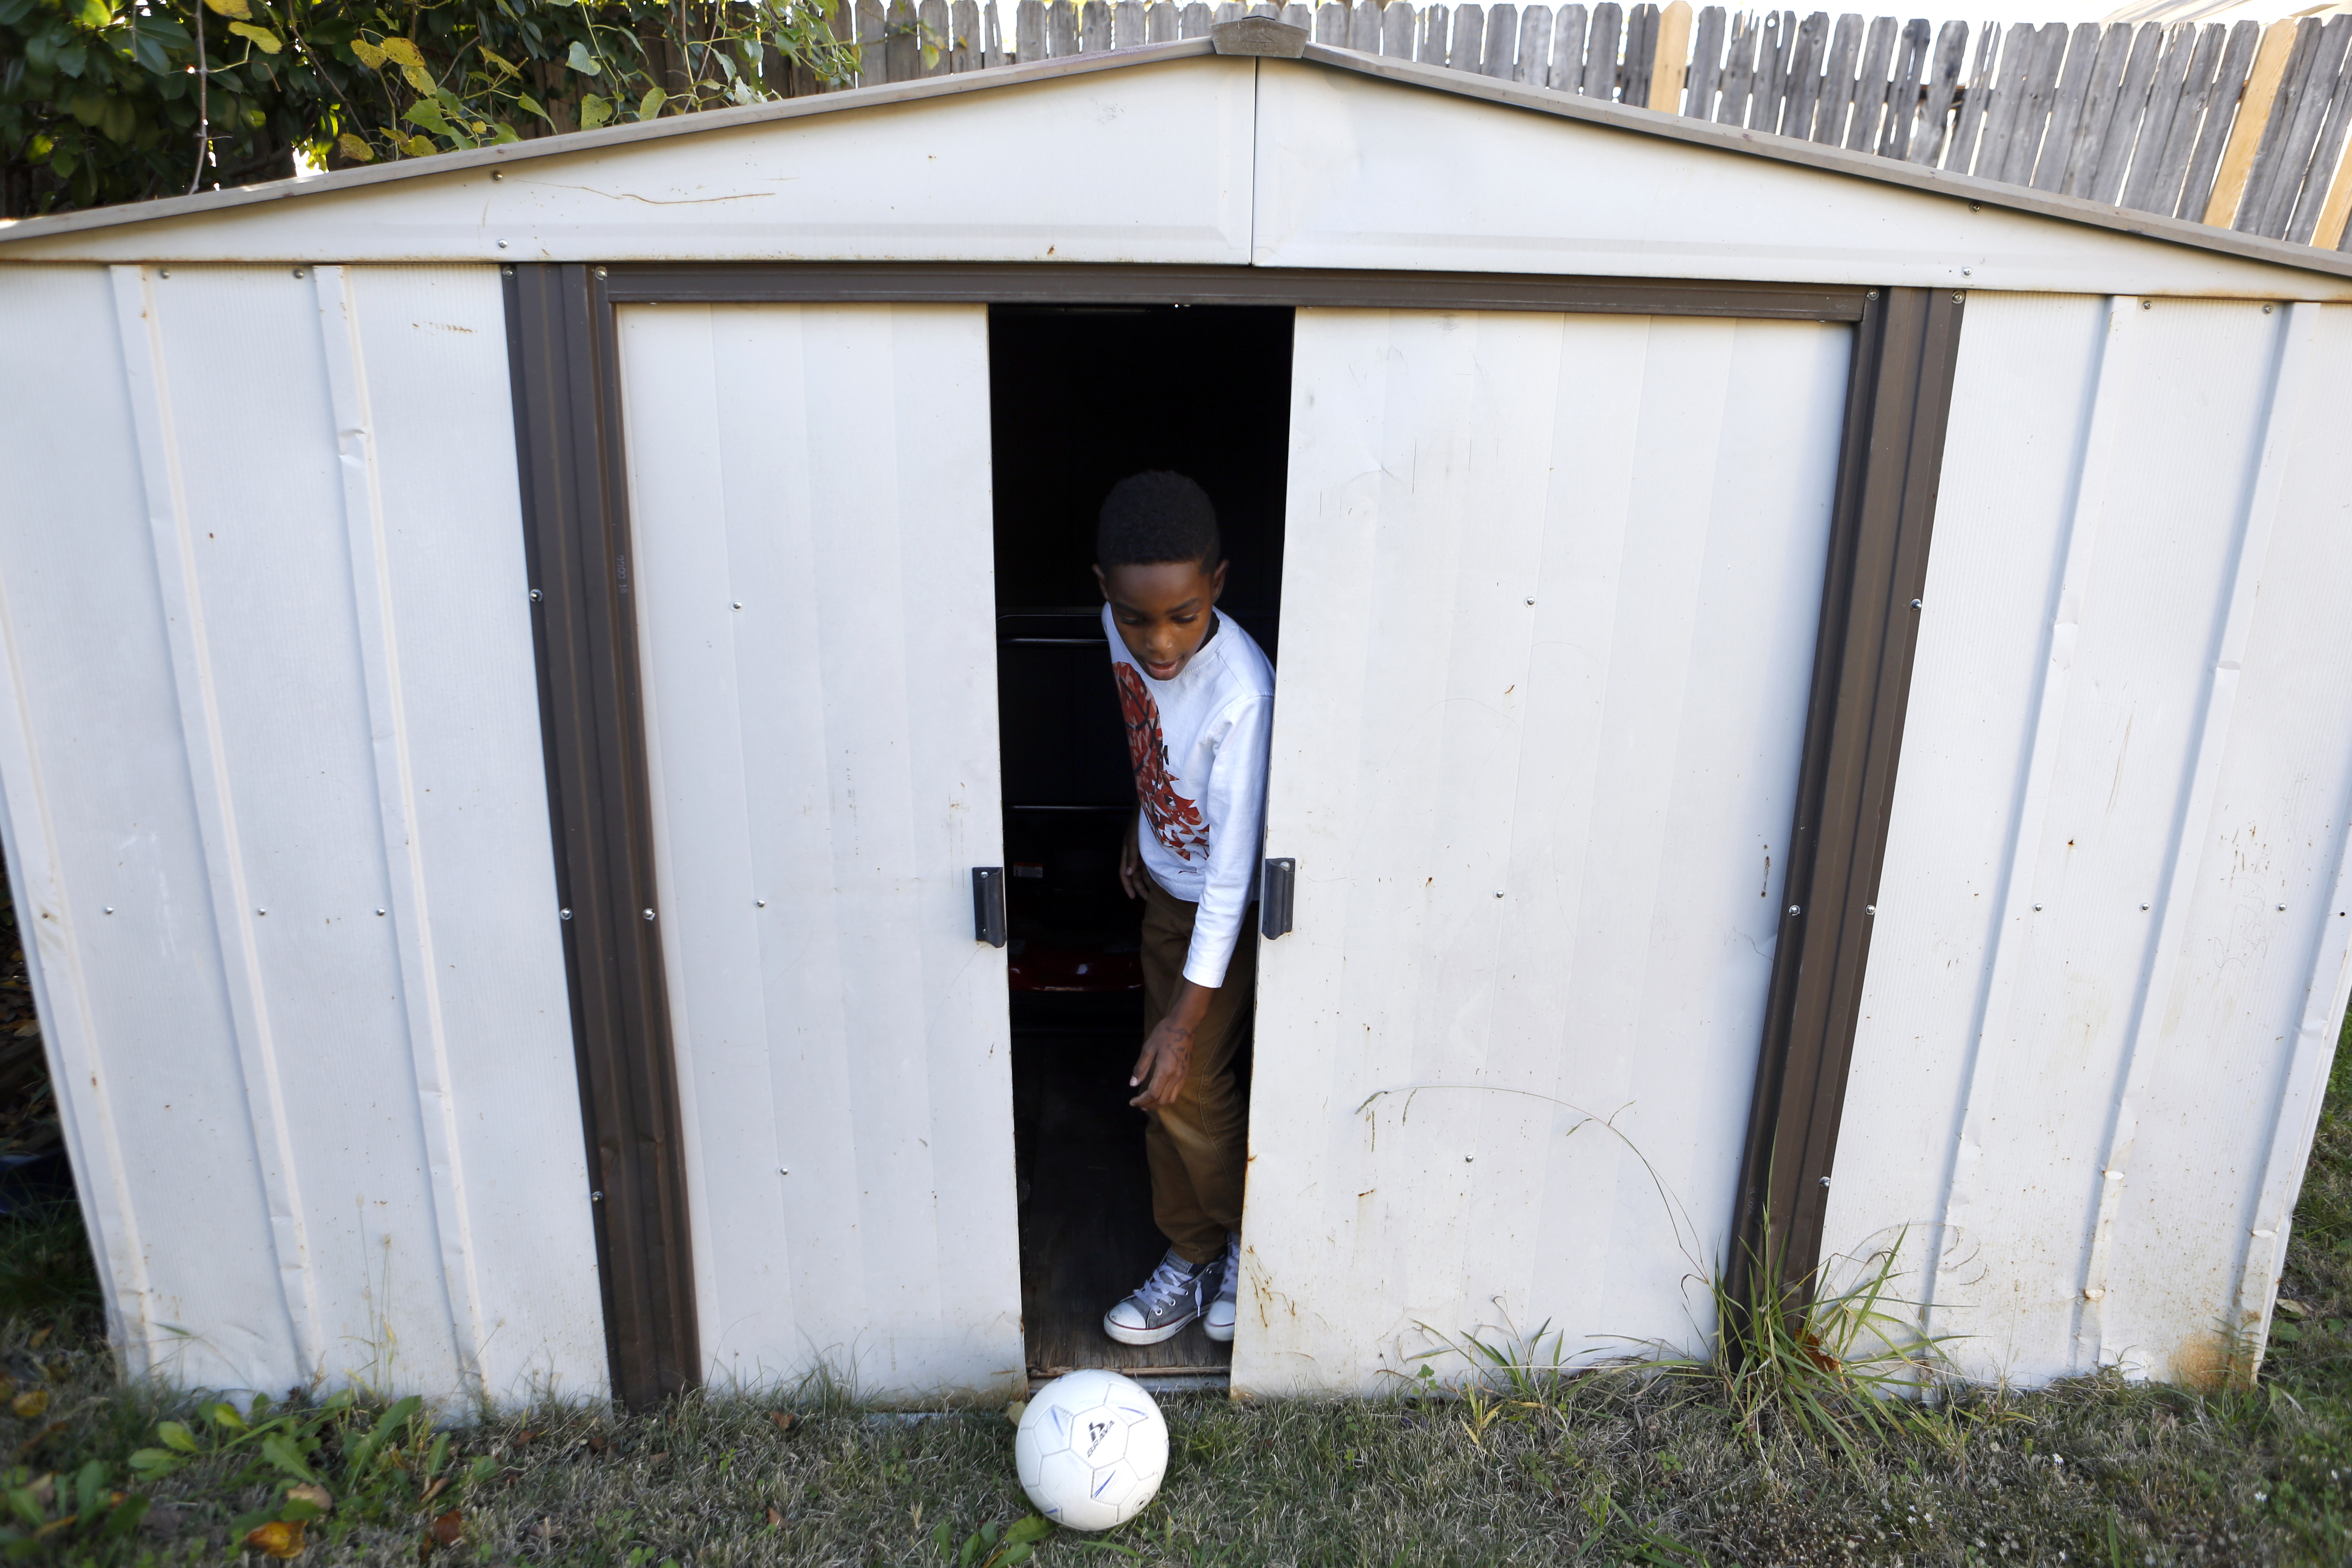 Jayden Anderson, 6, recovers the ball while playing in the backyard at rented home his family shares with a roommate in Garland. Their apartment was destroyed in a tornado in December 2015. Photographed on Monday, November 15, 2016. (photo © Lara Solt)